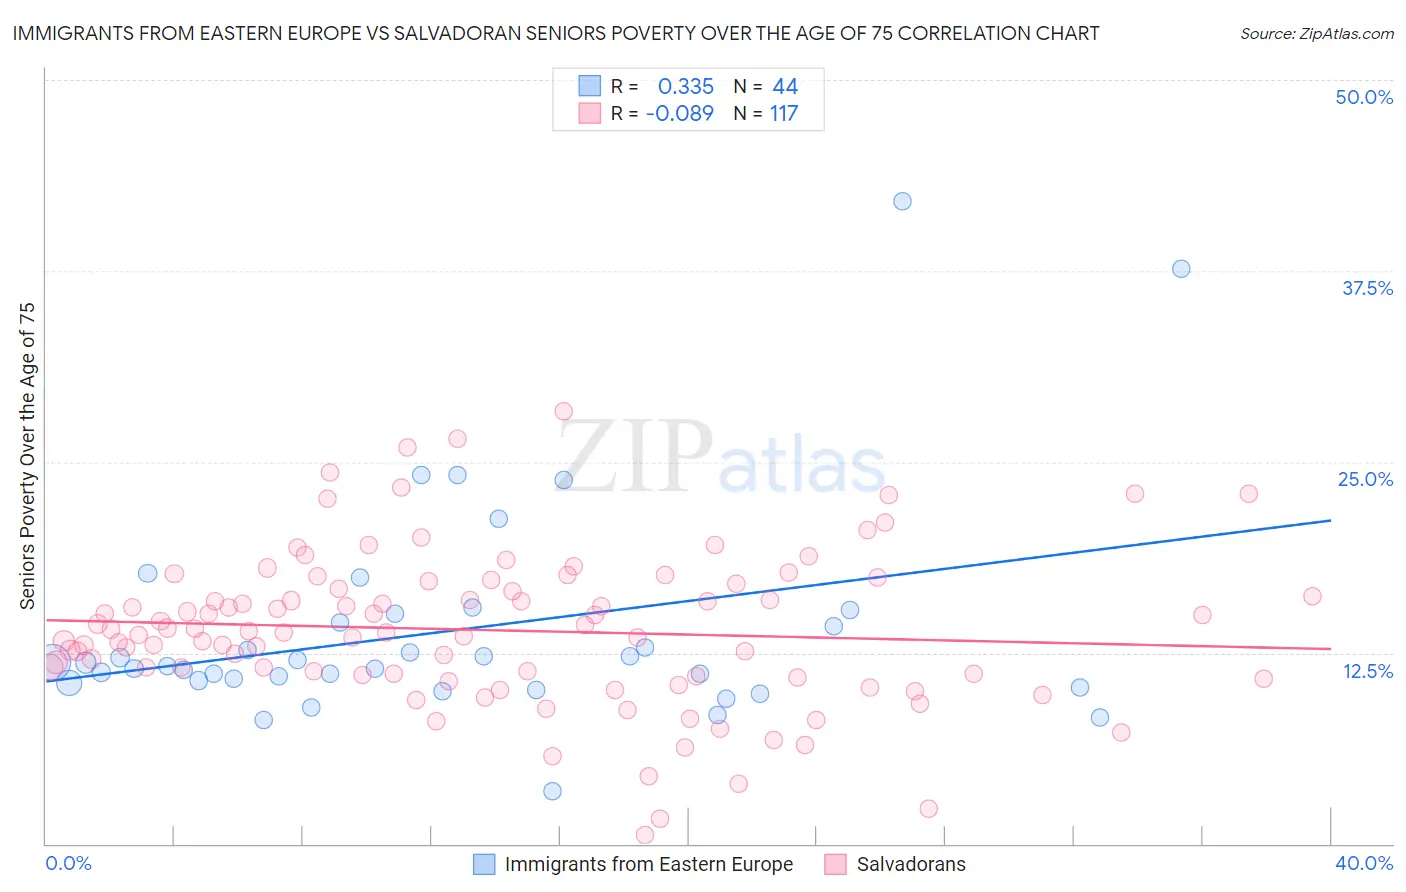 Immigrants from Eastern Europe vs Salvadoran Seniors Poverty Over the Age of 75